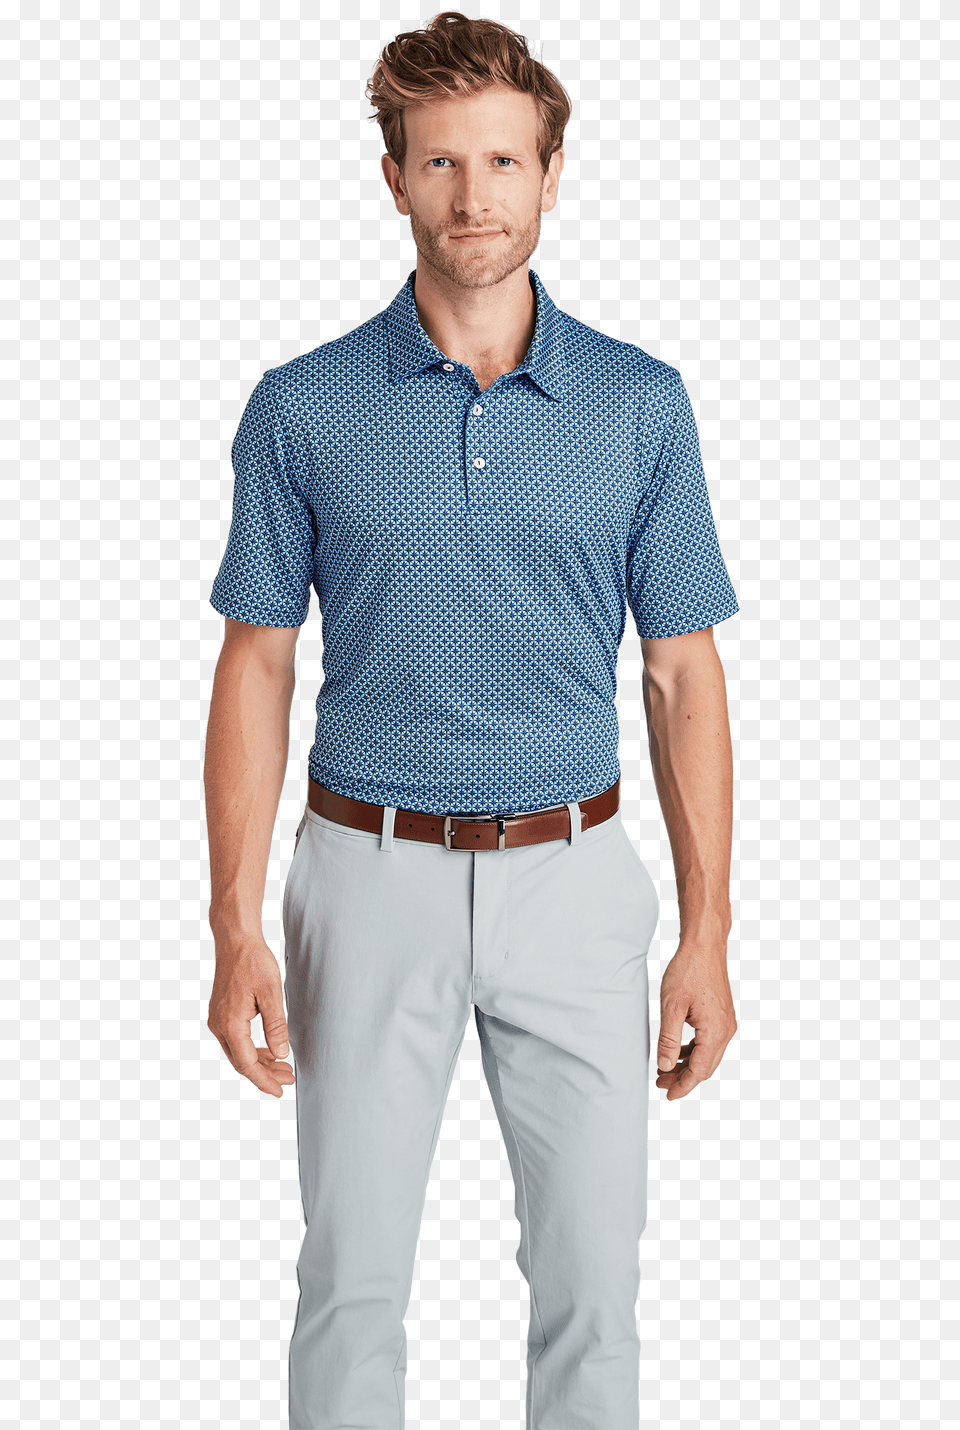 Standing, Shirt, Clothing, Male, Adult Png Image